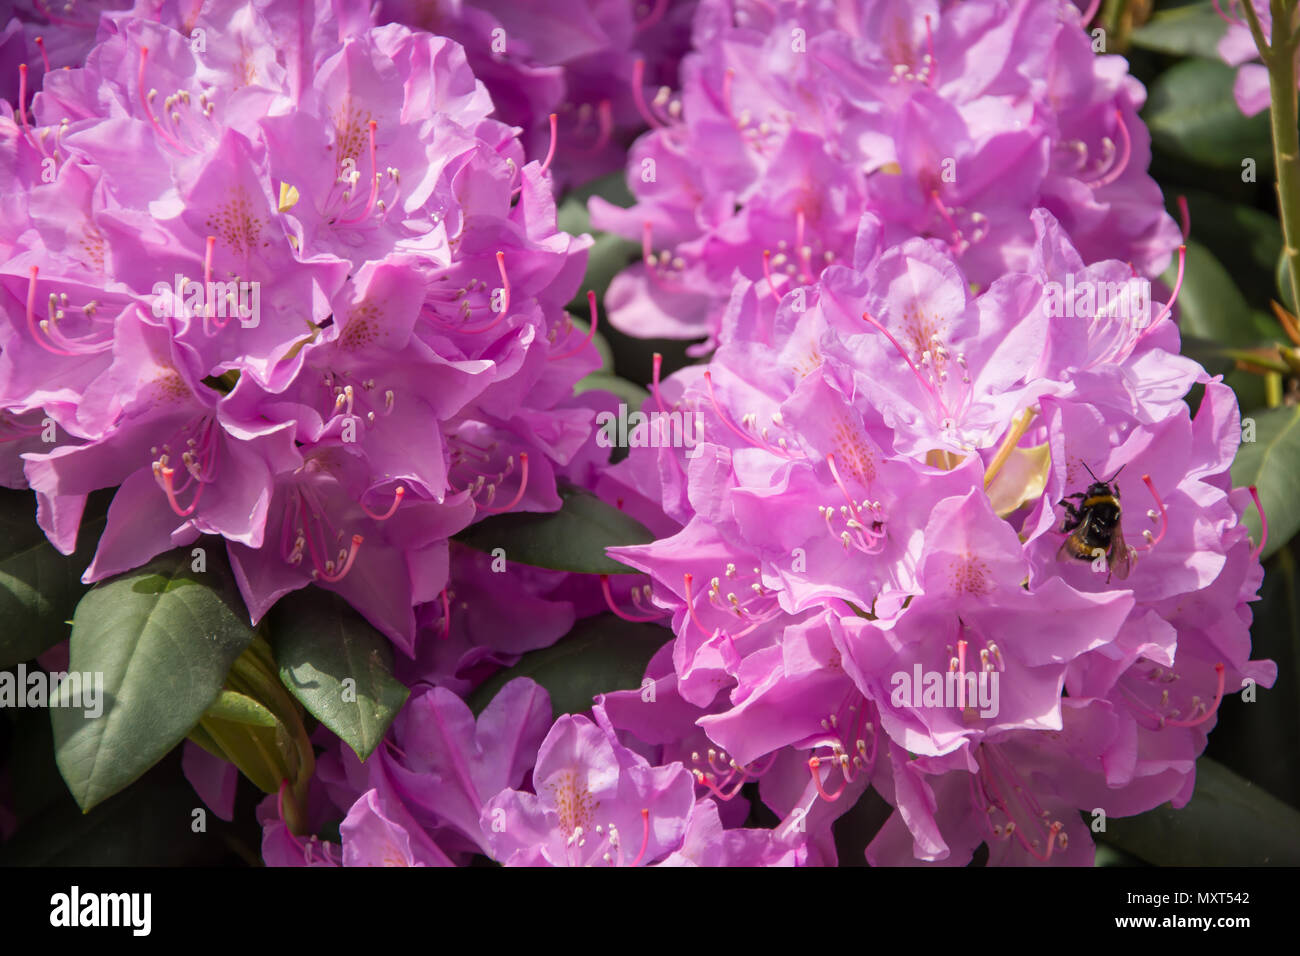 Closeup of rhododendron flowers with a bumblebee Stock Photo